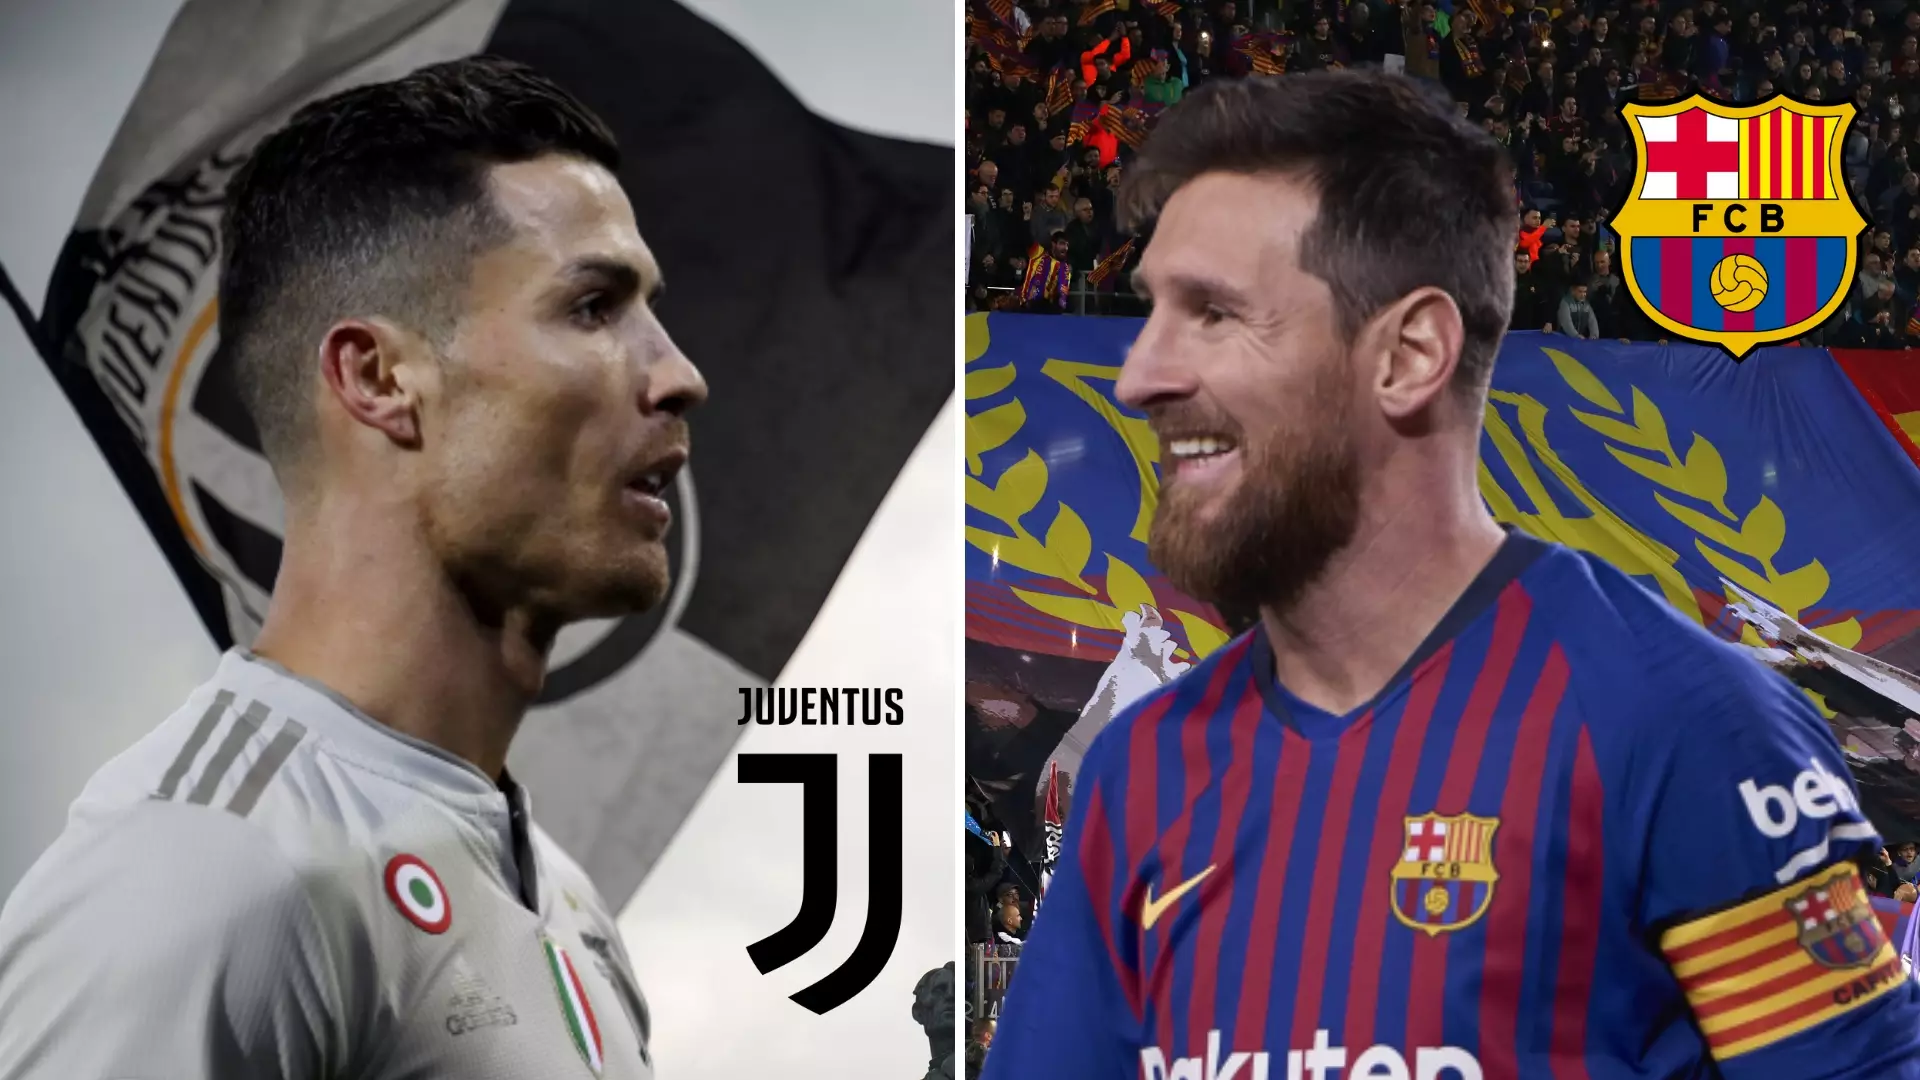 Messi's Stats Show How Much Better He Has Been Than Ronaldo This Season